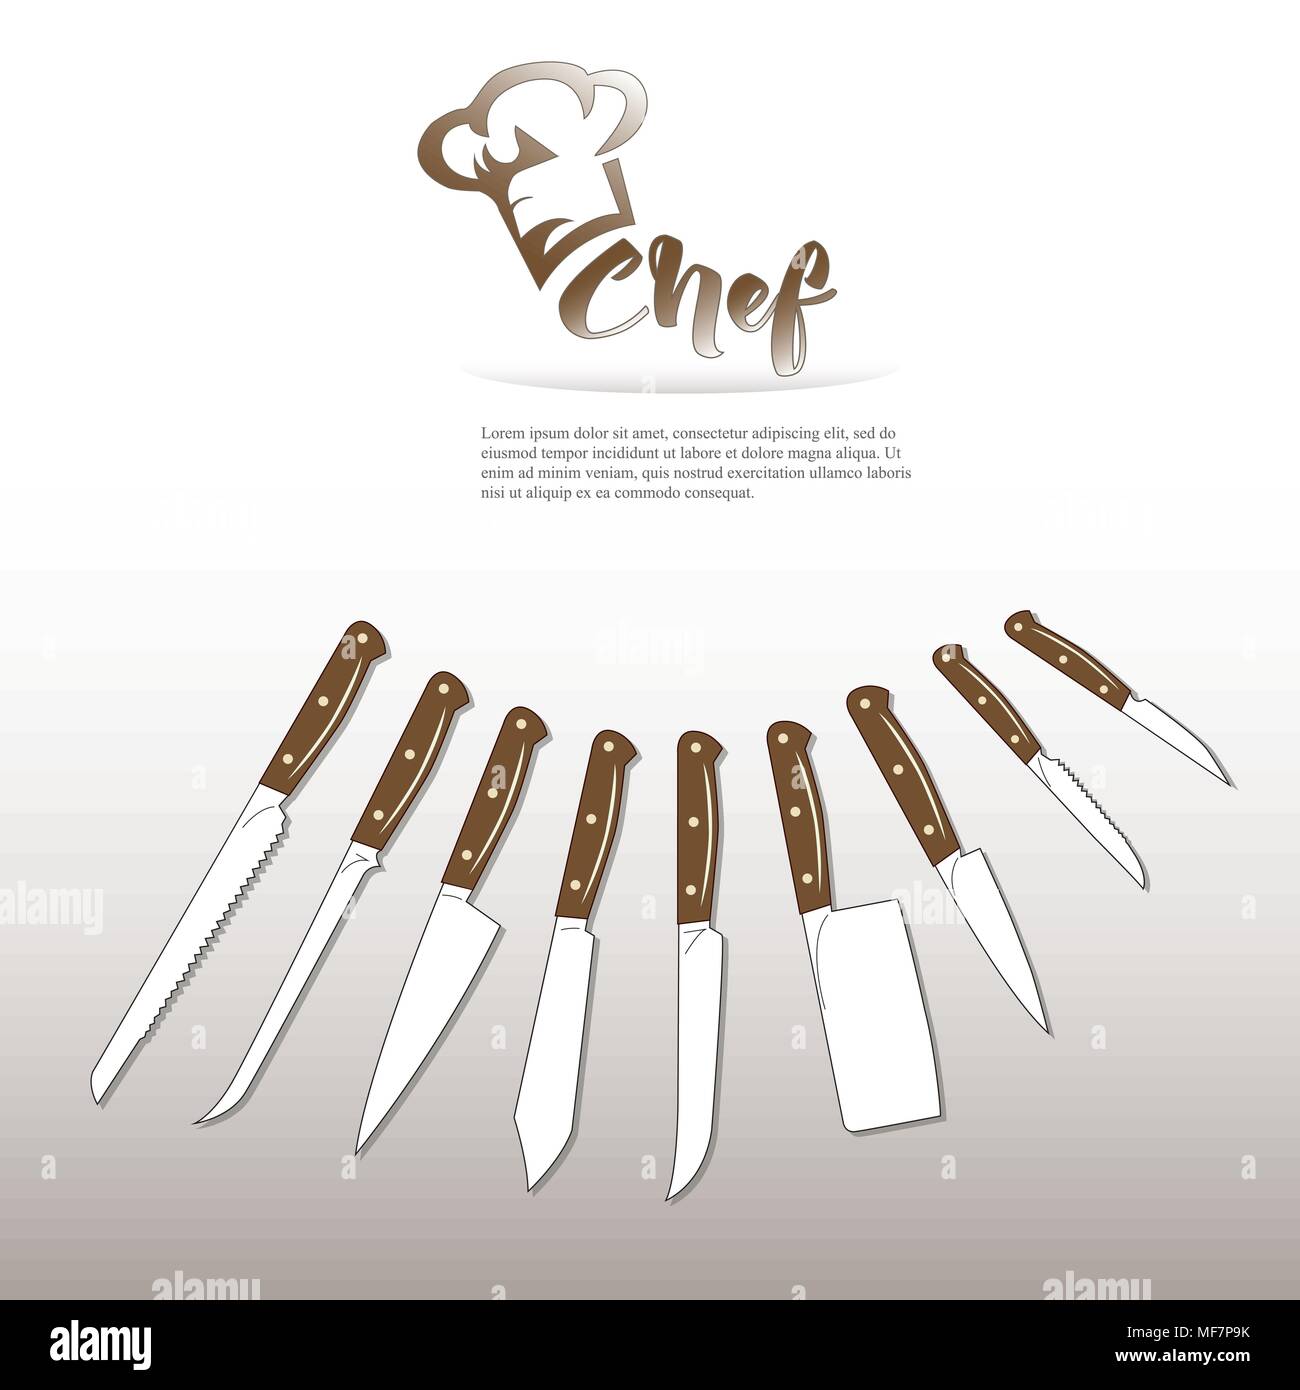 Set of kitchen knives with wooden handle chef logo Stock Vector